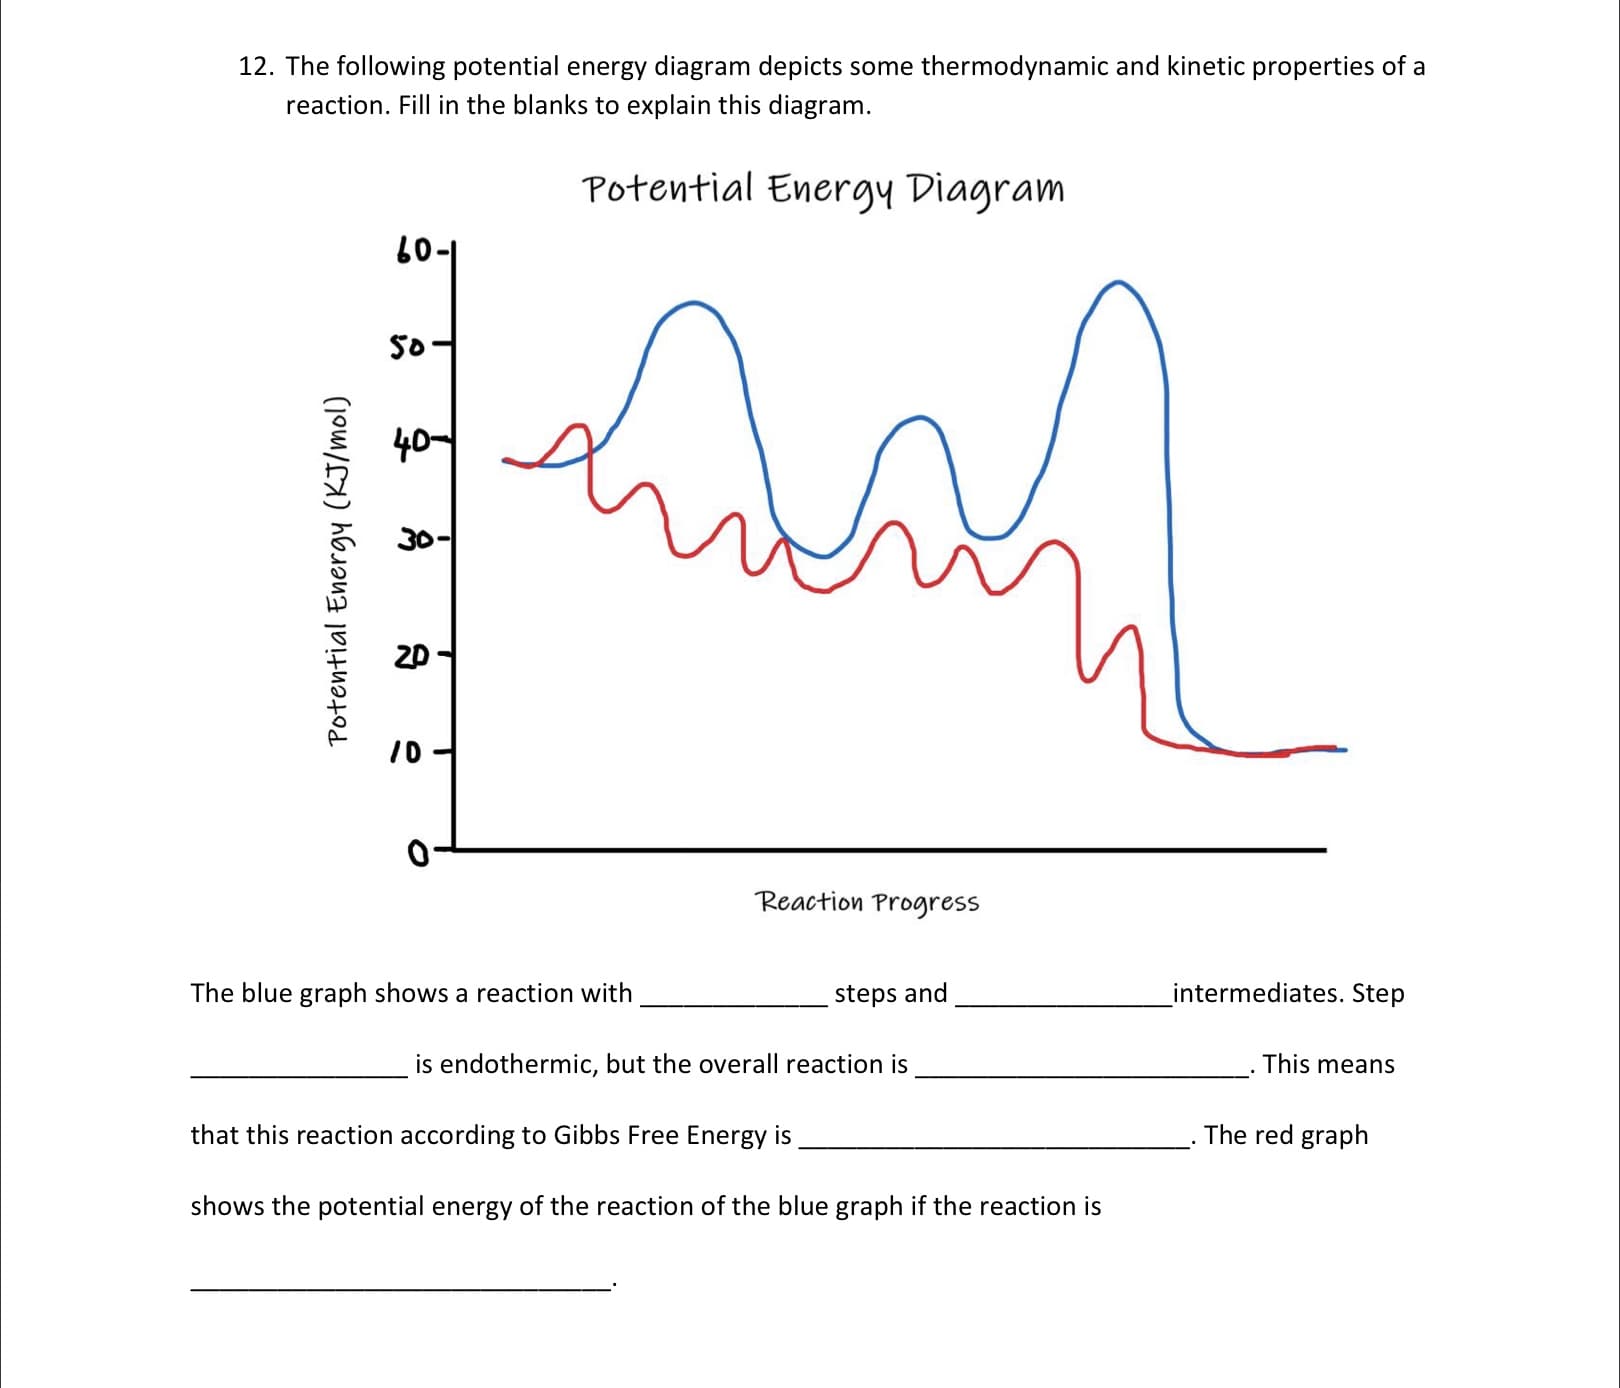 12. The following potential energy diagram depicts some thermodynamic and kinetic properties of a
reaction. Fill in the blanks to explain this diagram.
Potential Energy Diagram
60-
50-
40
2D
10
Reaction Progress
The blue graph shows a reaction with
steps and
intermediates. Step
is endothermic, but the overall reaction is
This means
that this reaction according to Gibbs Free Energy is
The red graph
shows the potential energy of the reaction of the blue graph if the reaction is
Potential Energy (KJ/mol)
